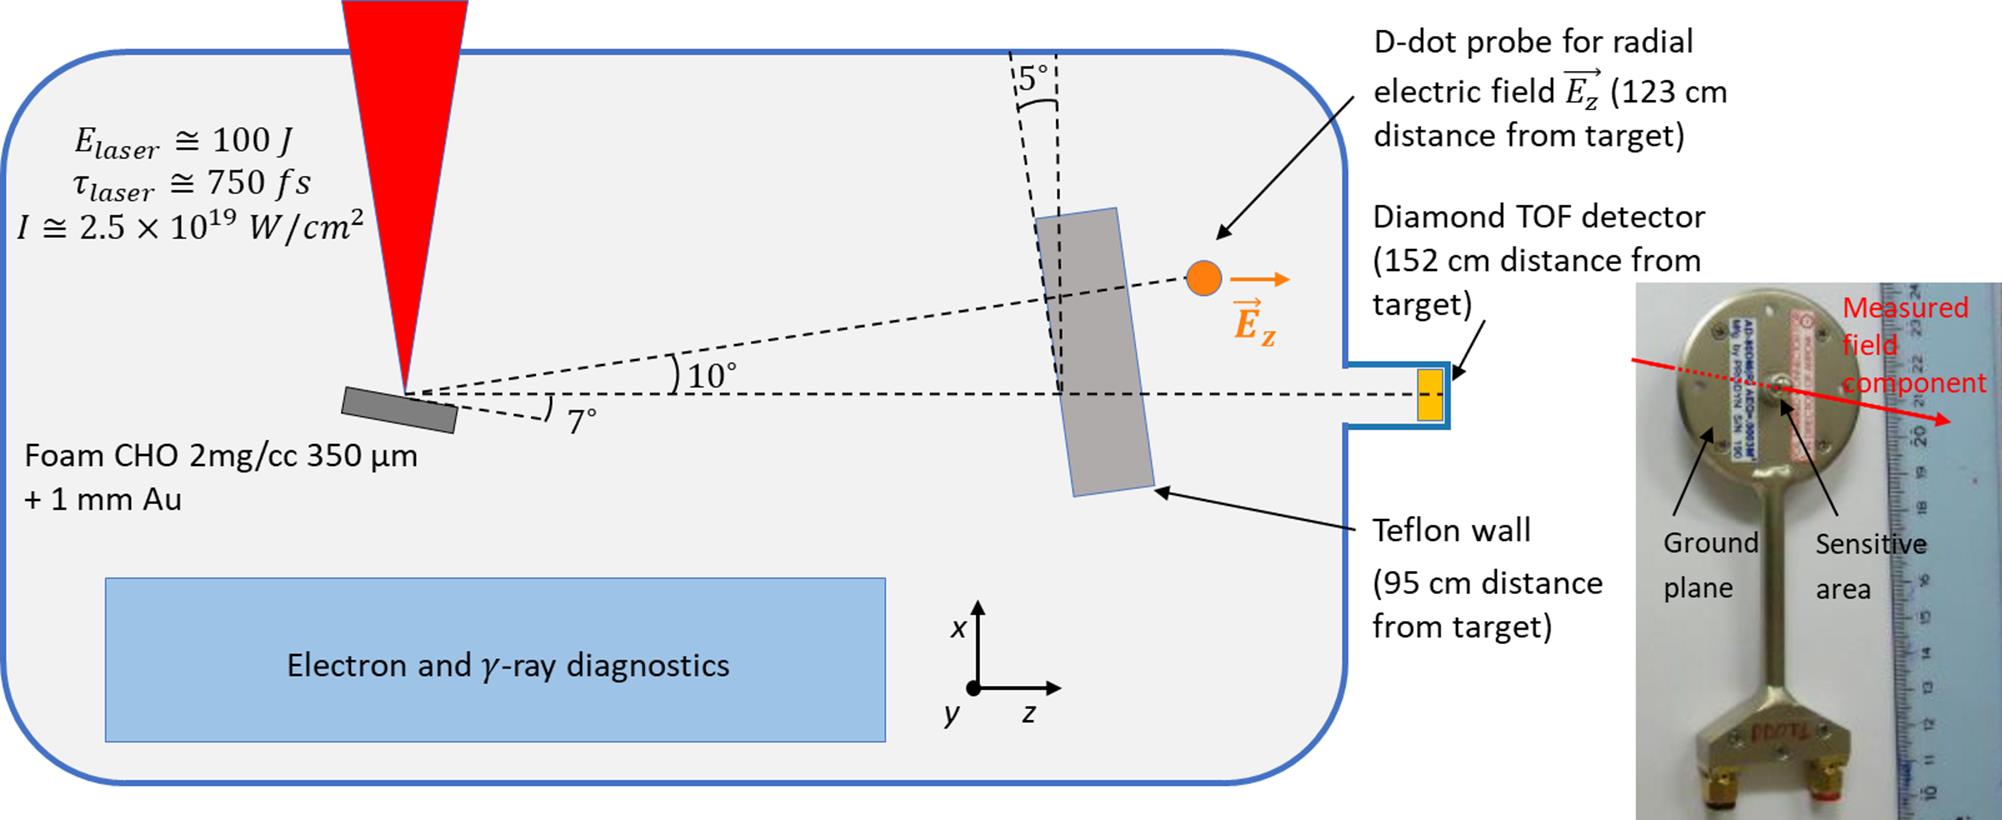 Experimental setup during the campaign. The focused laser pulse irradiated the solid target, tilted by with respect to the laser axis. Electron and -ray diagnostics were placed in the laser forward direction, whereas the EMP field probe was placed at about from the laser axis at a distance of 123 cm from the interaction point. The ions accelerated by the interaction were detected by means of a diamond TOF diagnostic that was elevated above the Teflon ( from the laser axis, 152 cm away from the target). The photograph shows the D-dot probe used in the experiment.